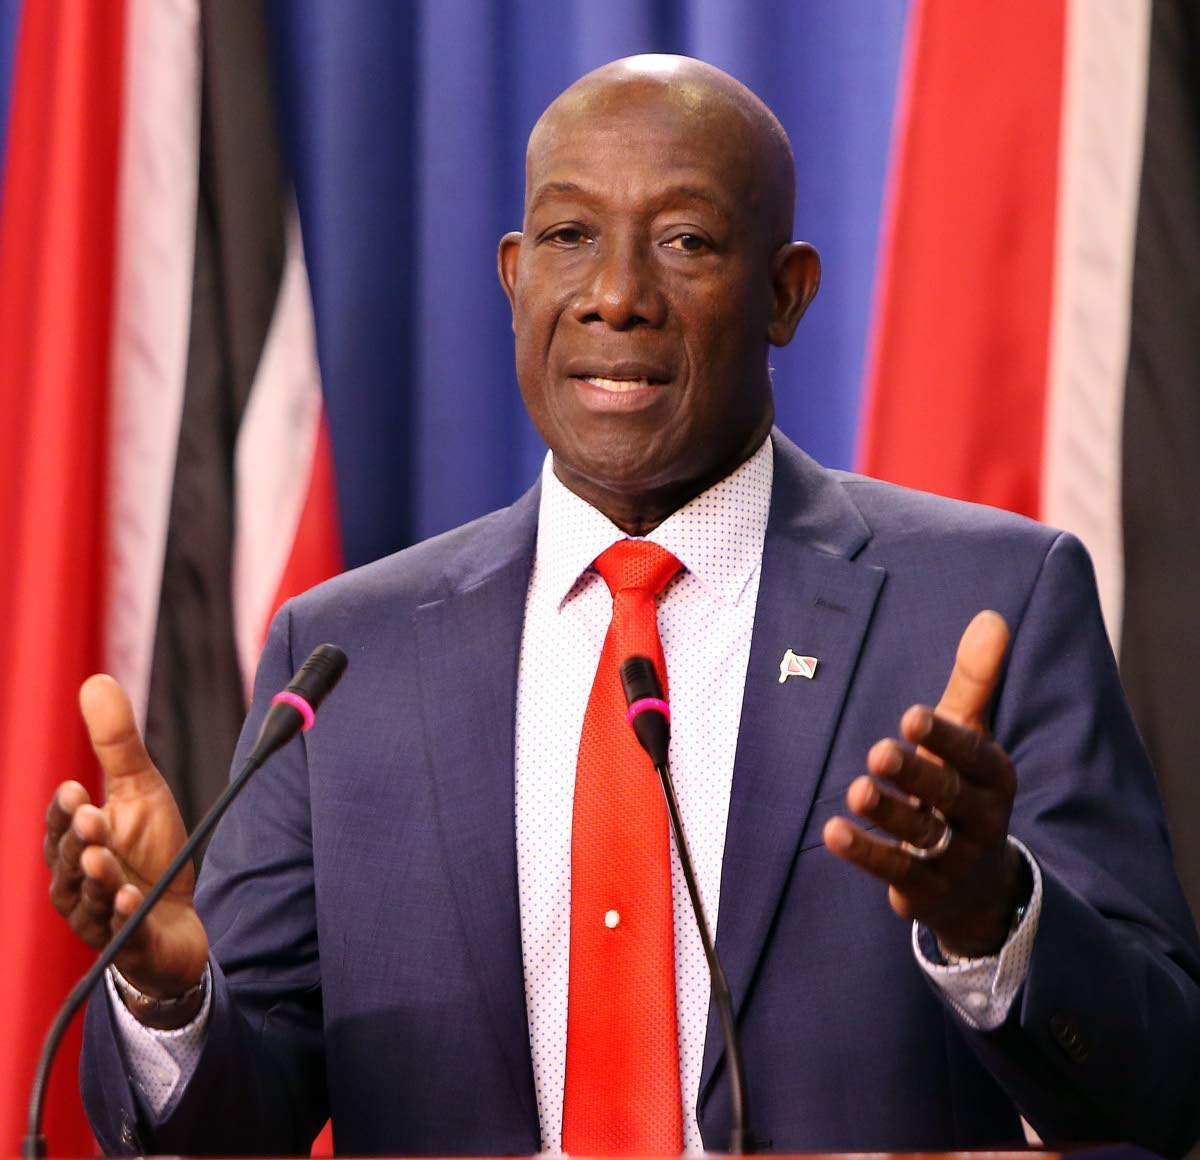 Prime Minister Rowley Rates 8 Out Of 10, Trade Relations Between T&T and Jamaica